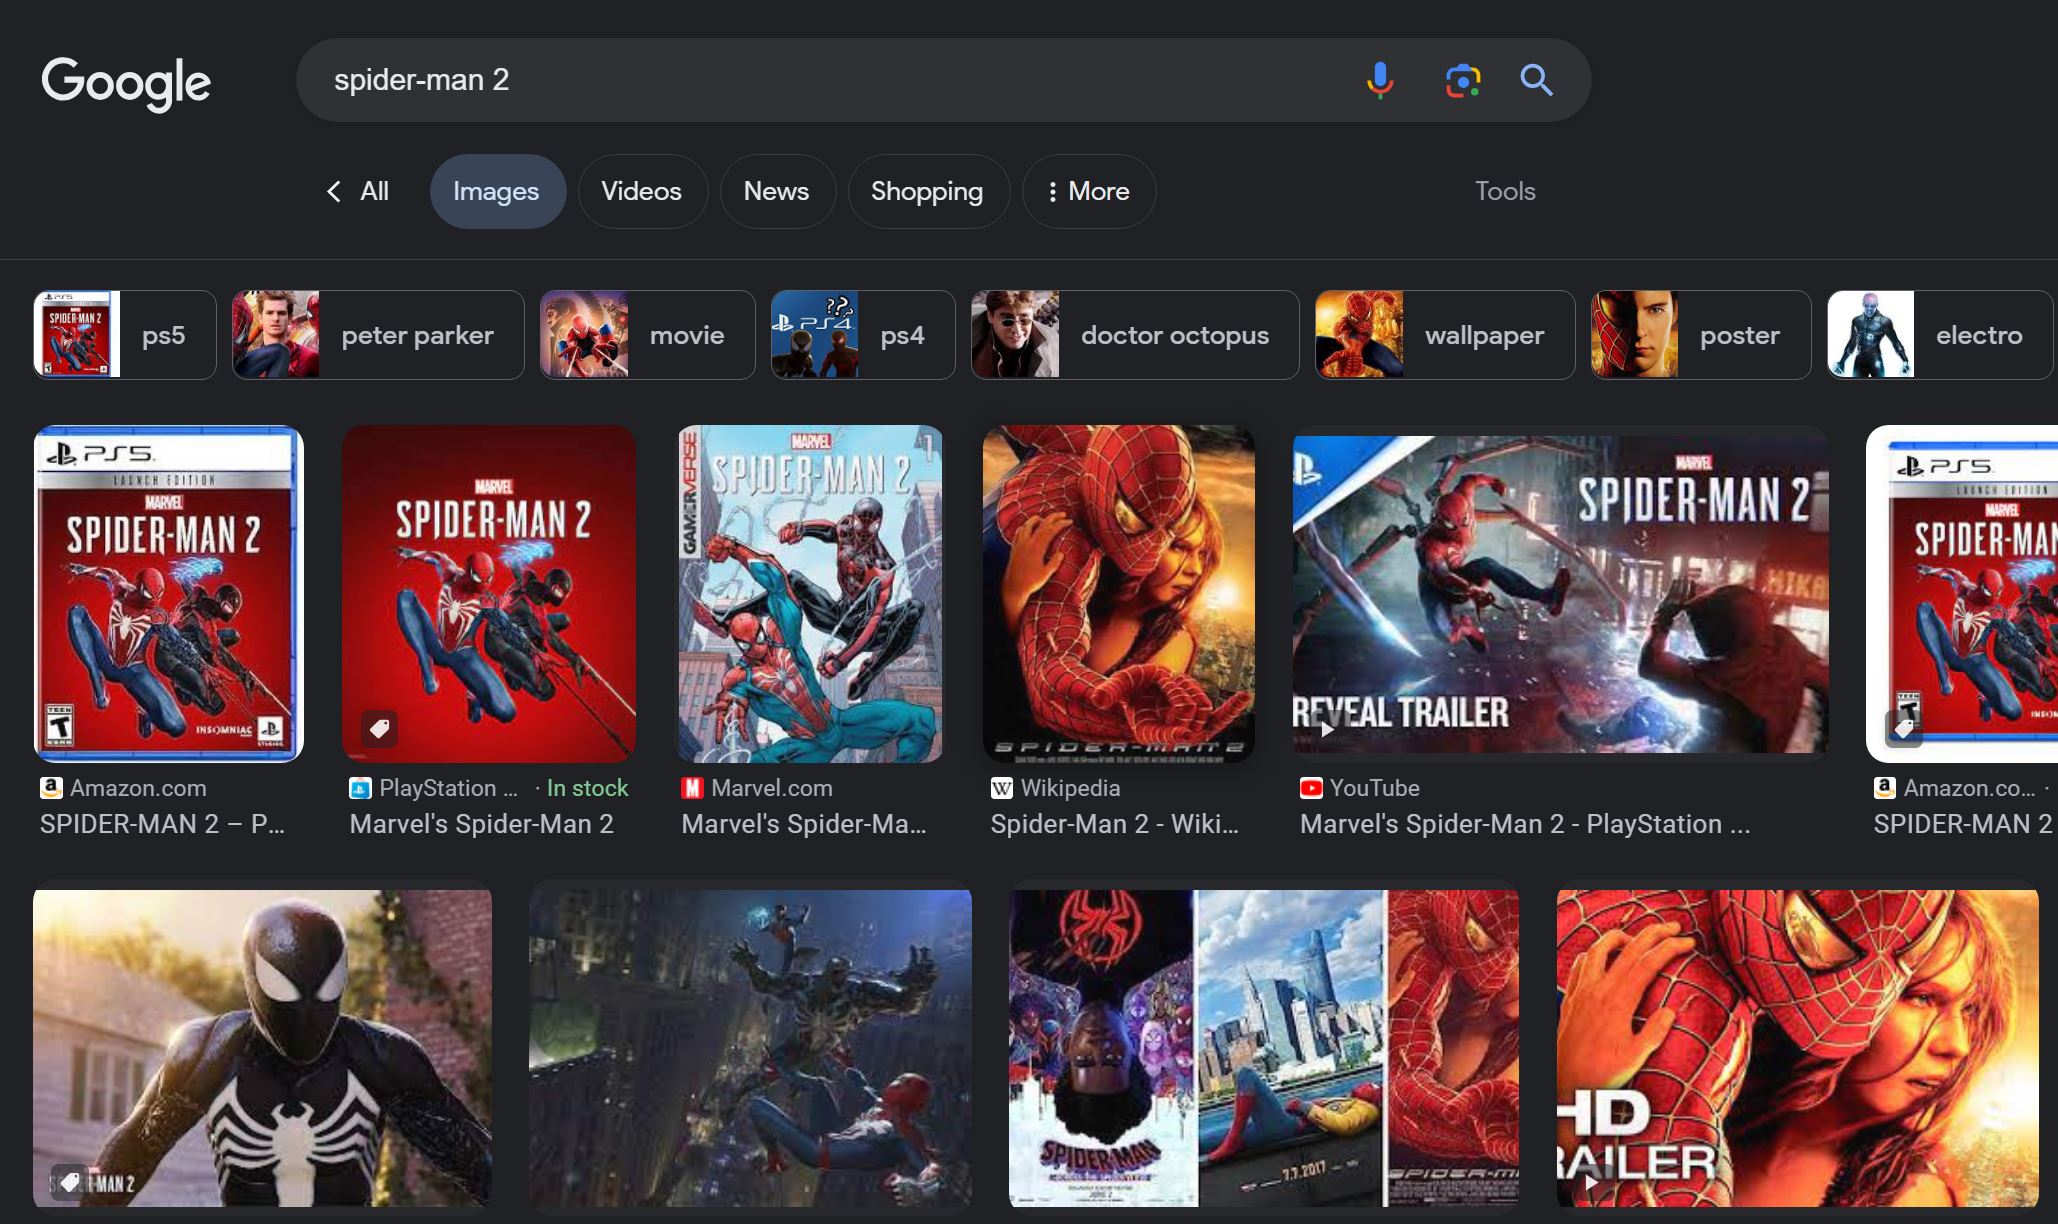 A screenshot of a Google Image Search using the phrase “Spider-Man 2” depicts images of the PS5 game Marvel’s Spider-Man 2, as well as multiple images from various eras of Spider-Man movie sequels